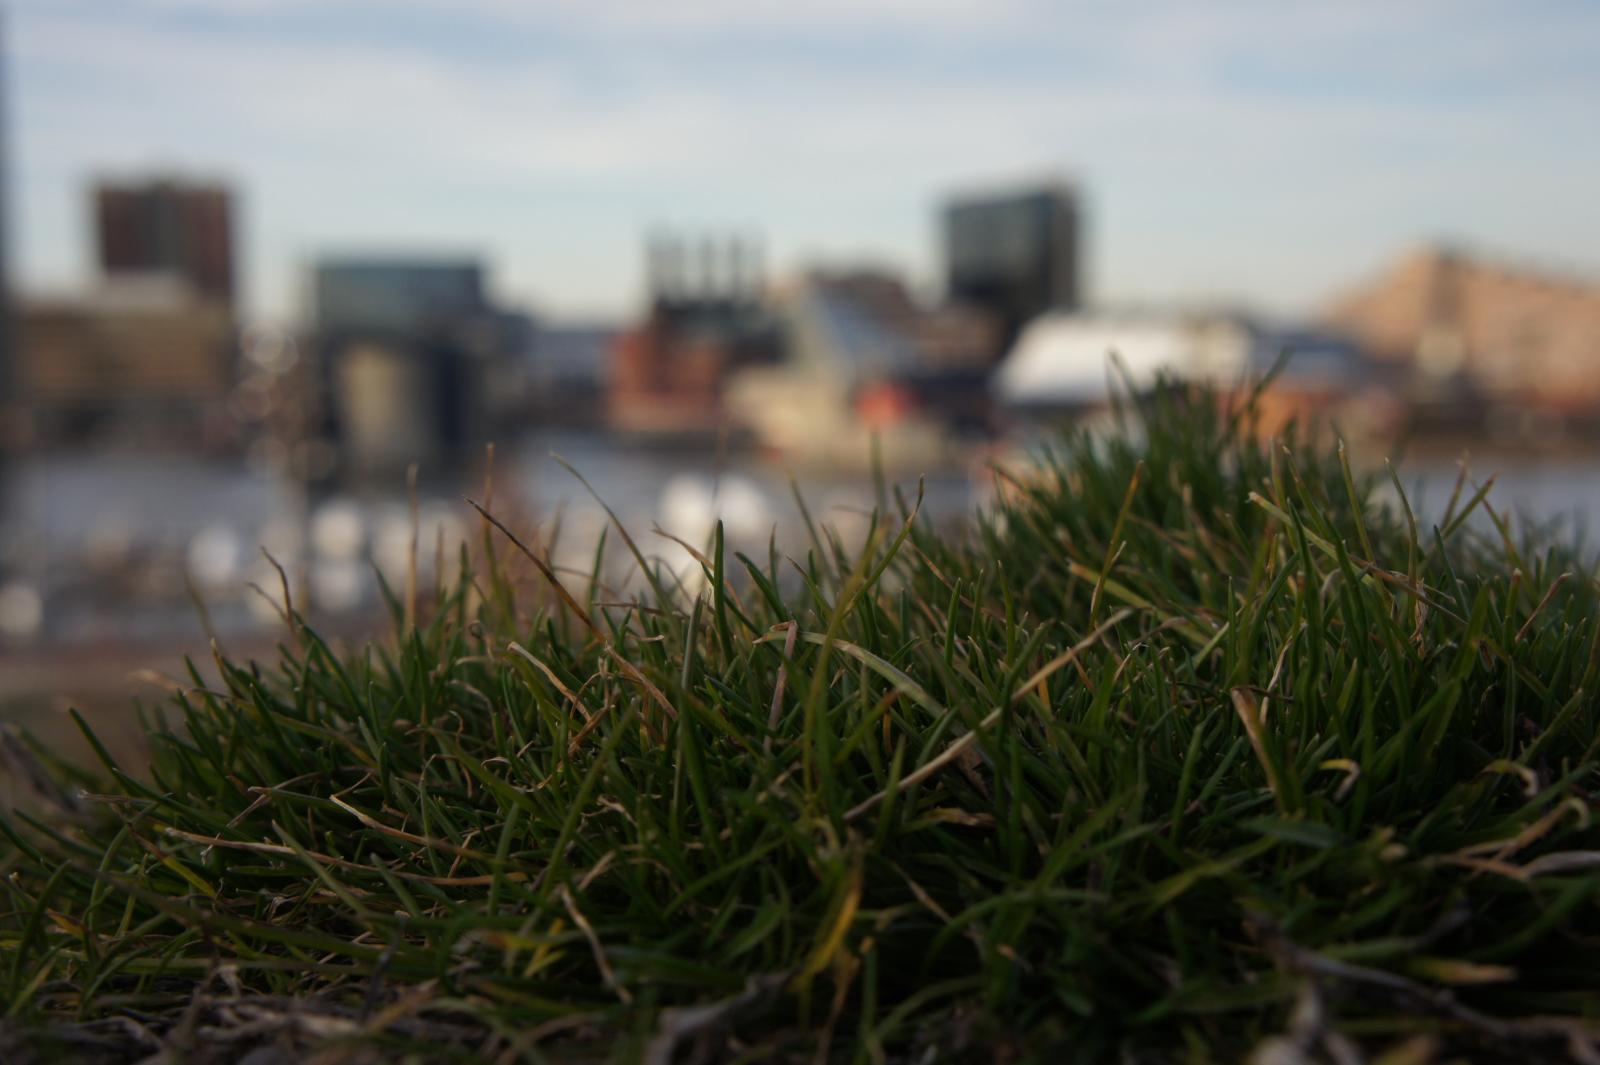 Sitting atop Federal Hill Park allows you to peer into the Inner Harbor in a way that is beautiful. Peaceful. This photograph shares one of those views.

Location: Federal Hill Park